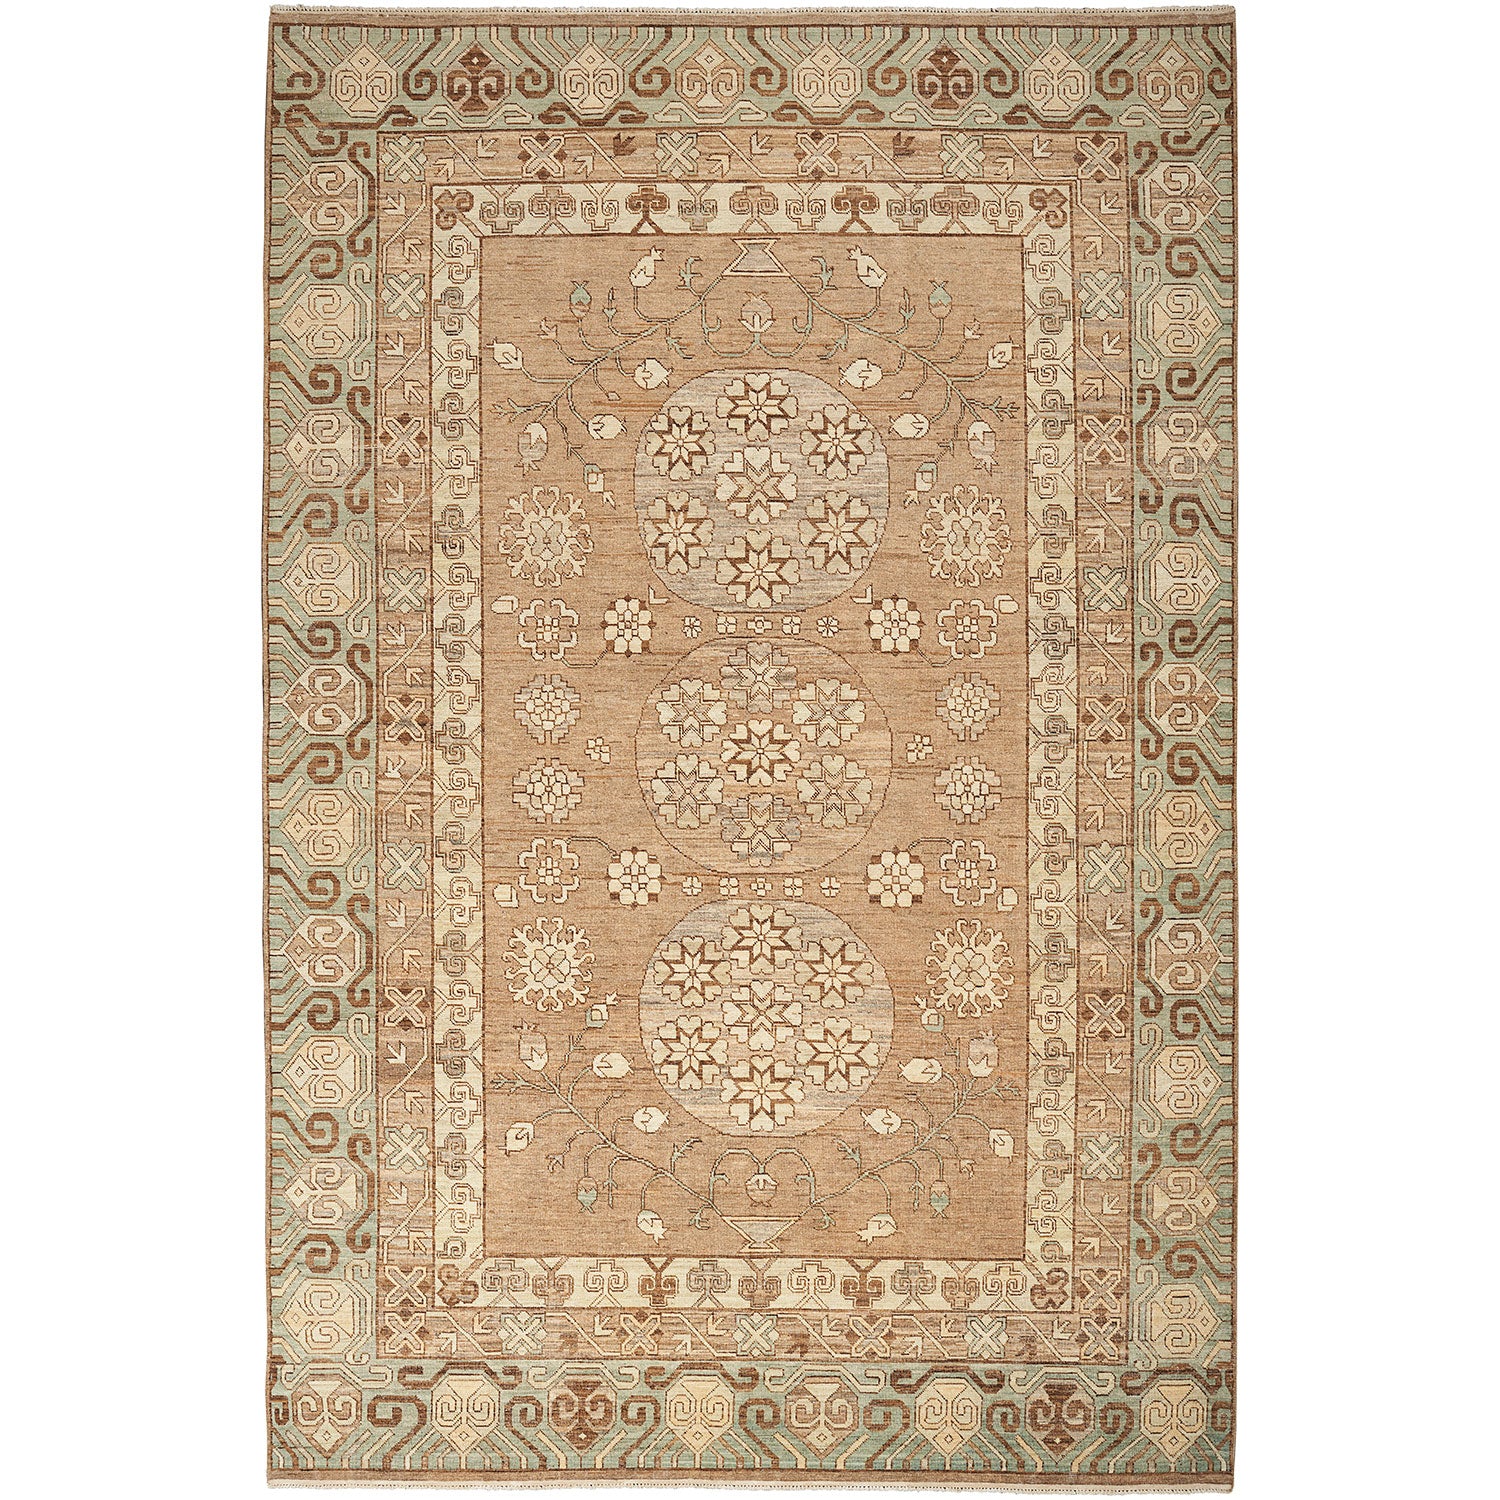 An intricately designed traditional rug with symmetrical medallion patterns.